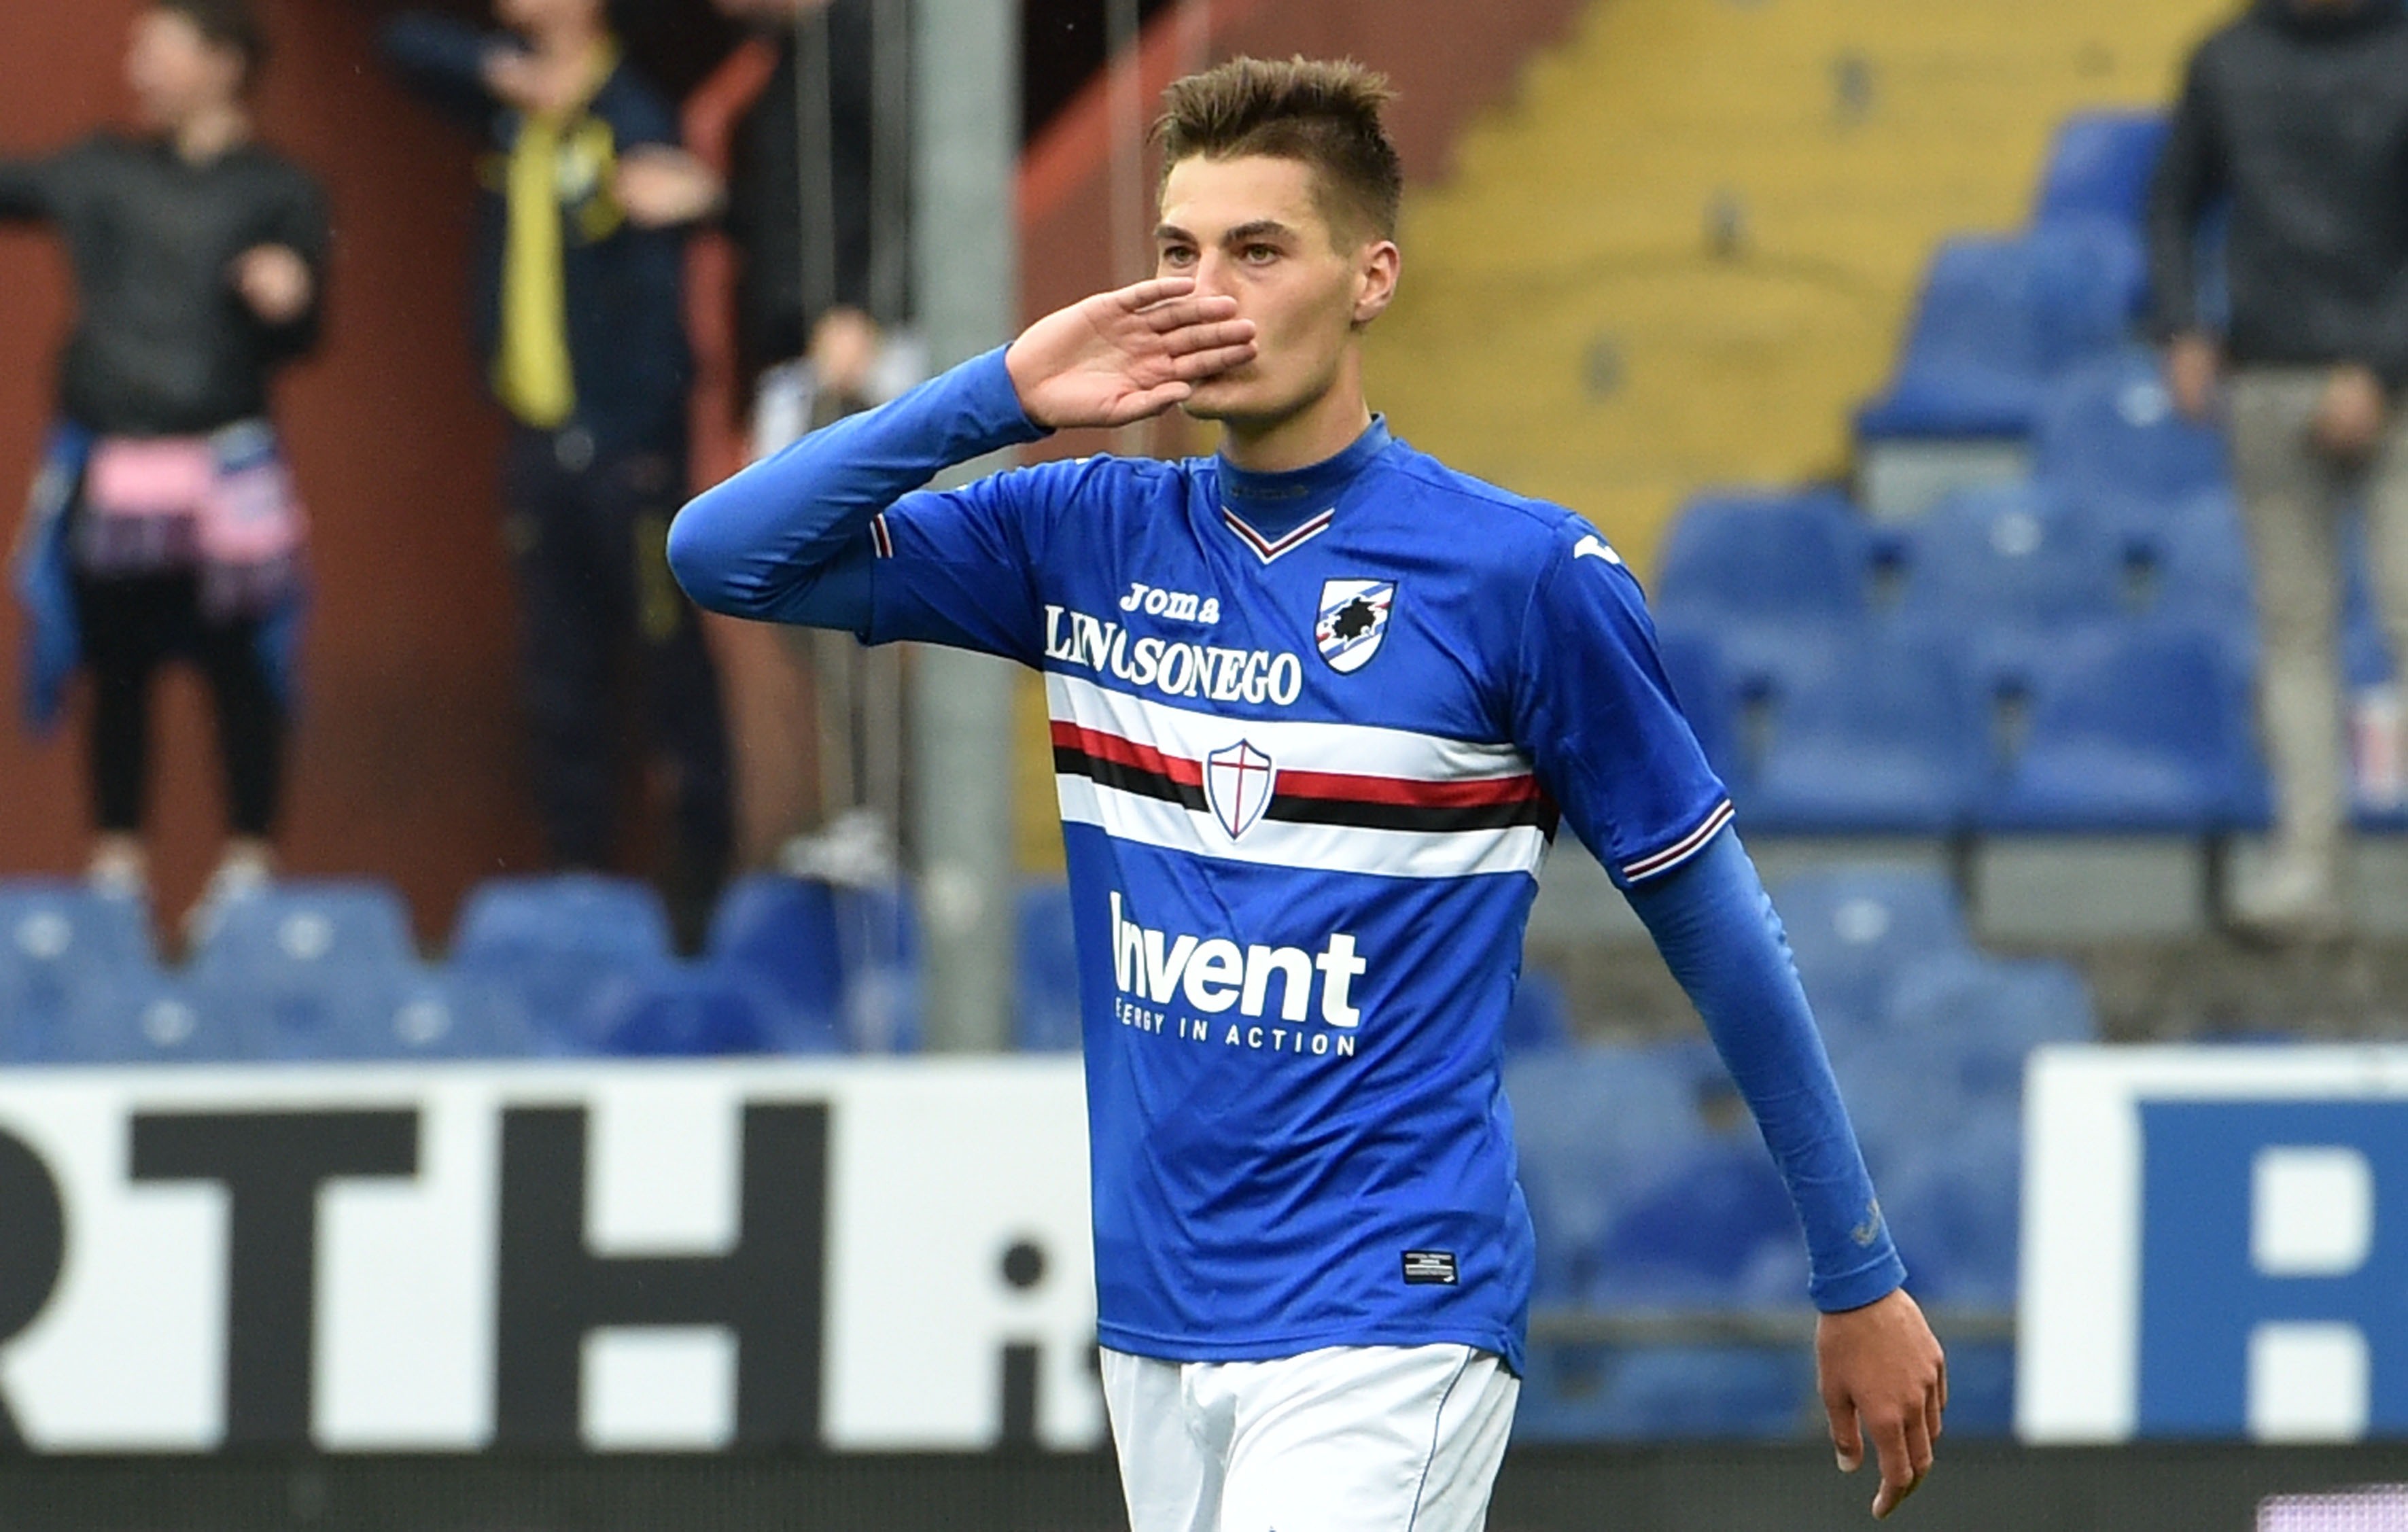 Schick’s agent: “His future? Nothing has been decided”